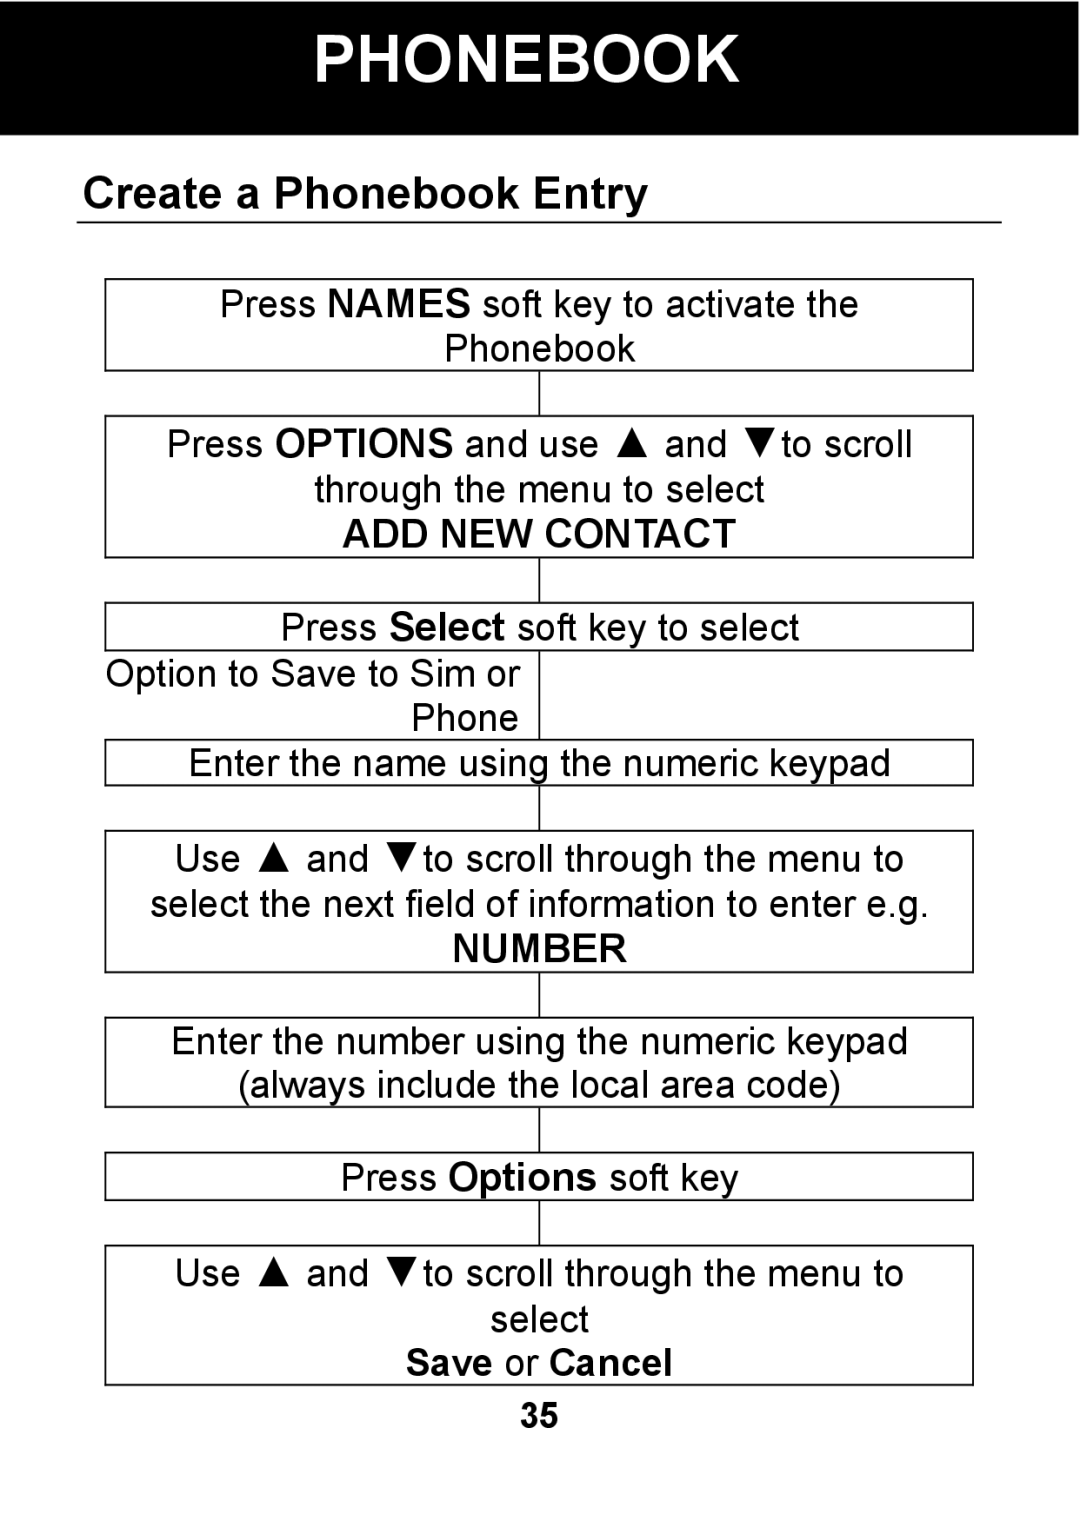 Pal/Pax PAL101 manual Create a Phonebook Entry, ADD NEW Contact, Number, Save or Cancel 